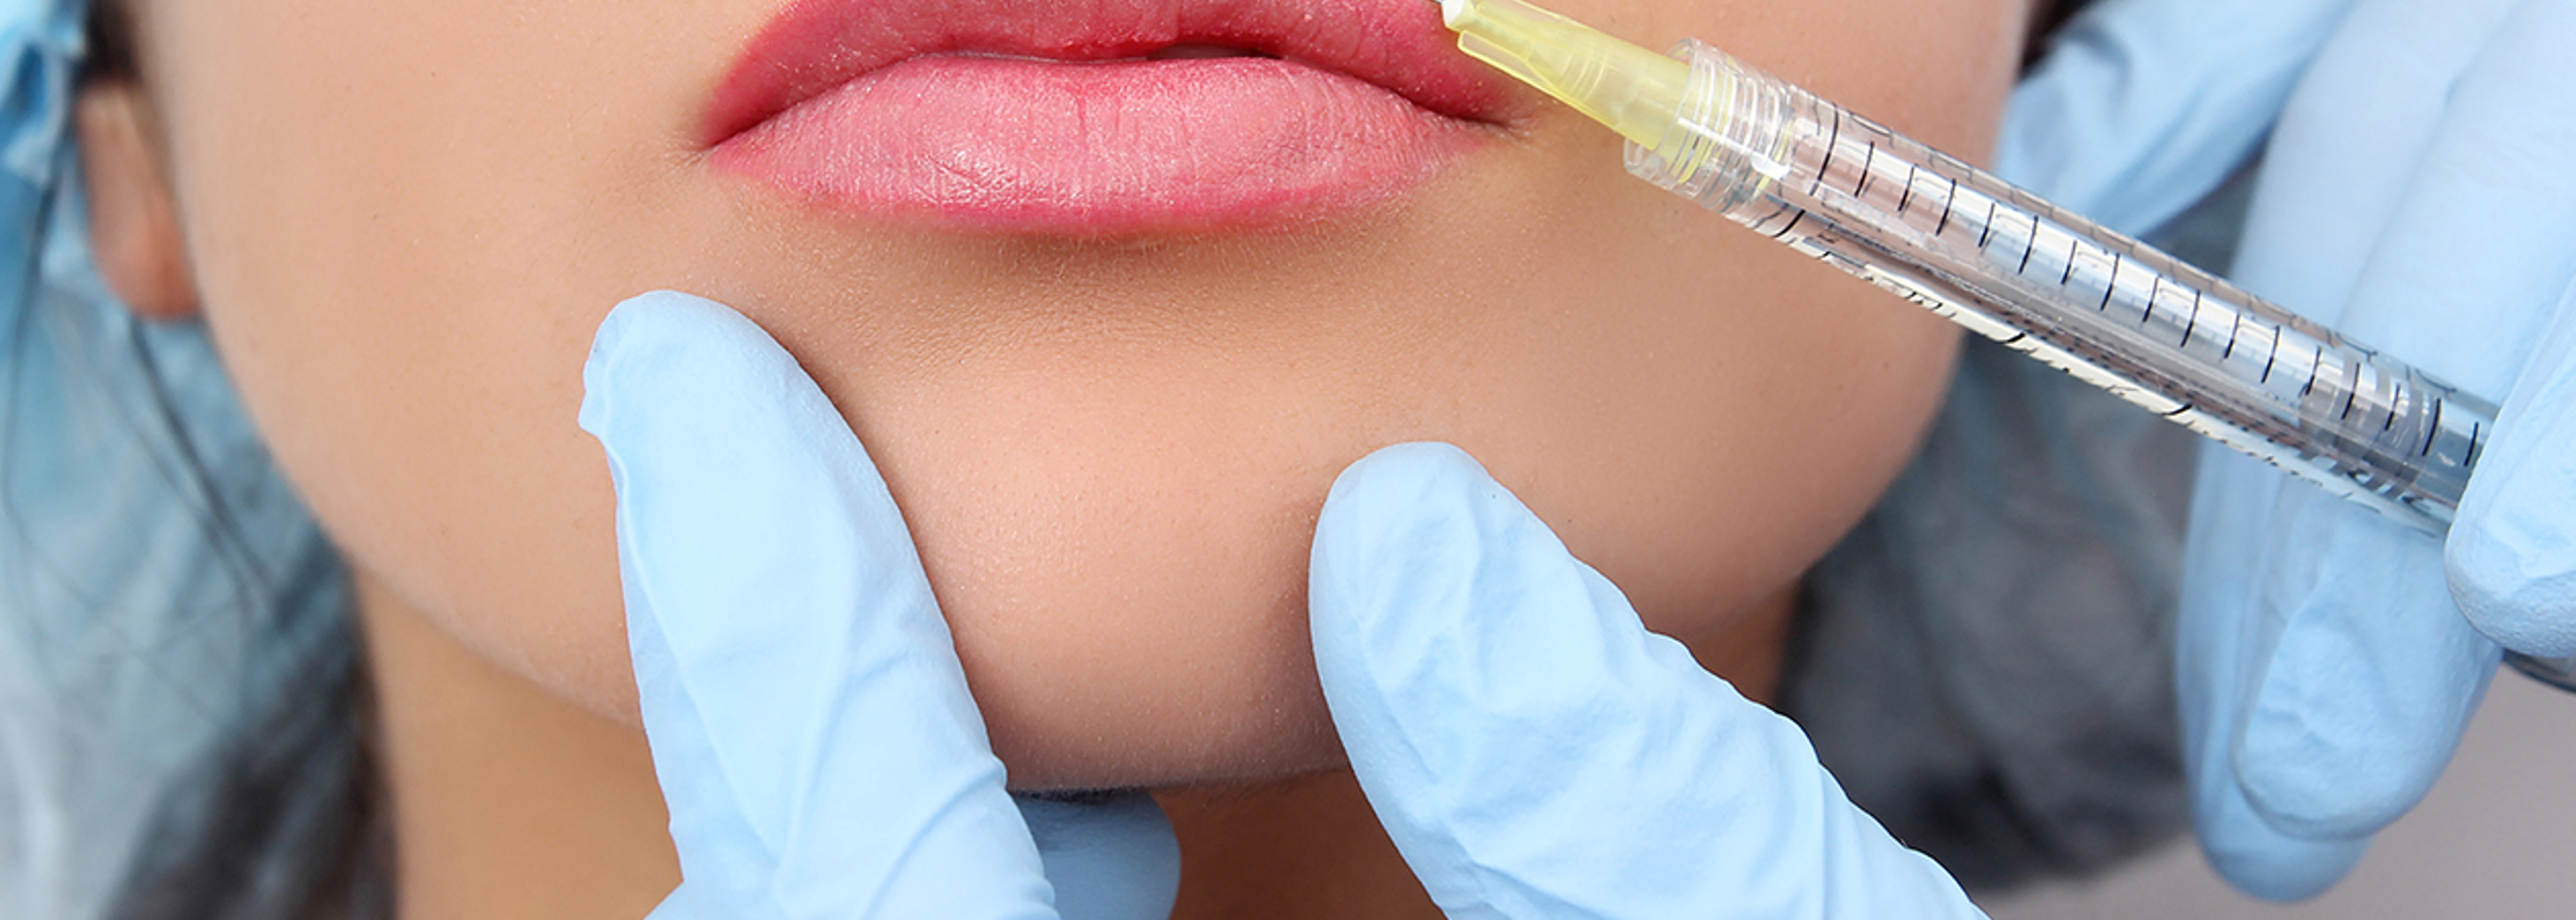 Calls for tougher regulation of dermal fillers gather pace